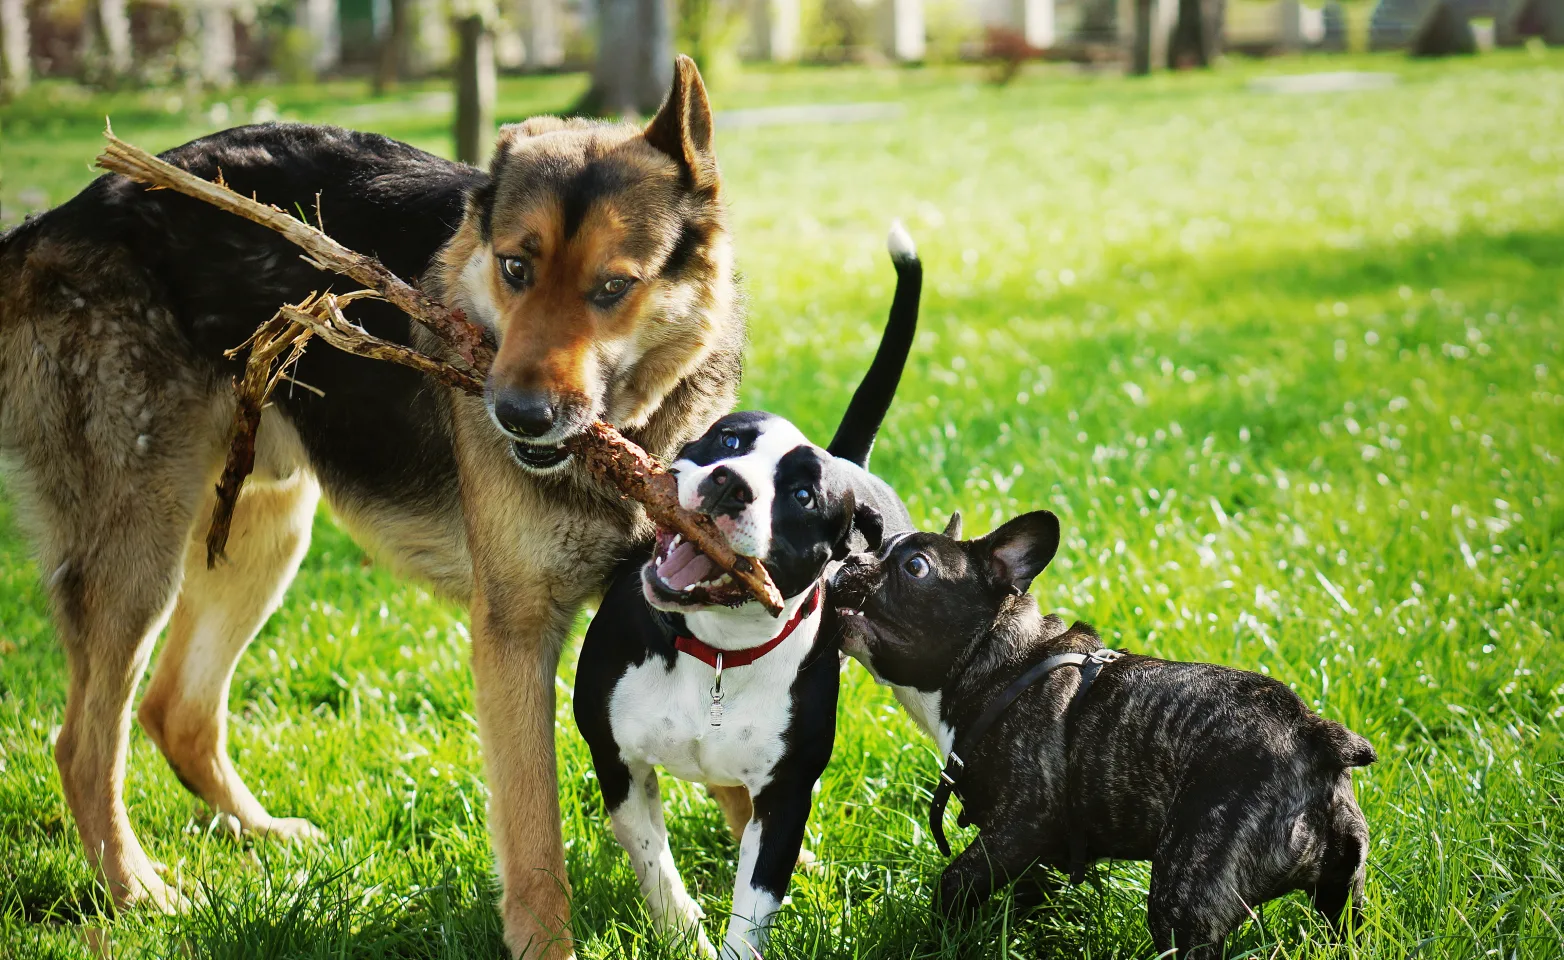 Dogs playing with a stick